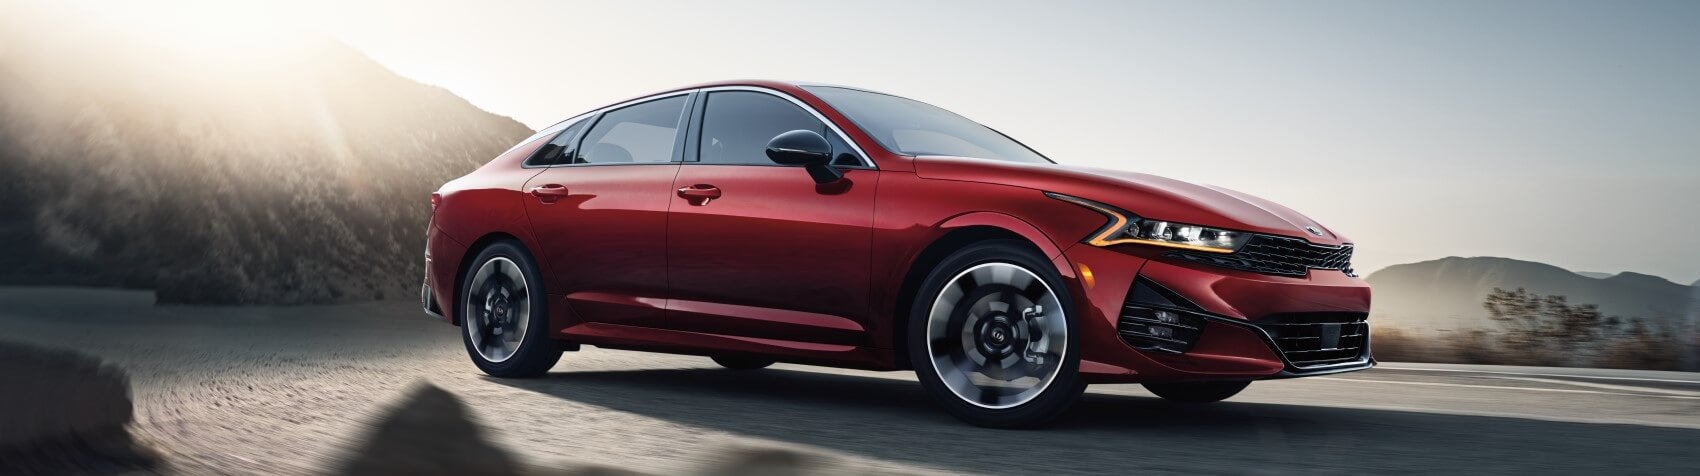 What Are the 2021 Kia K5 Color Options?